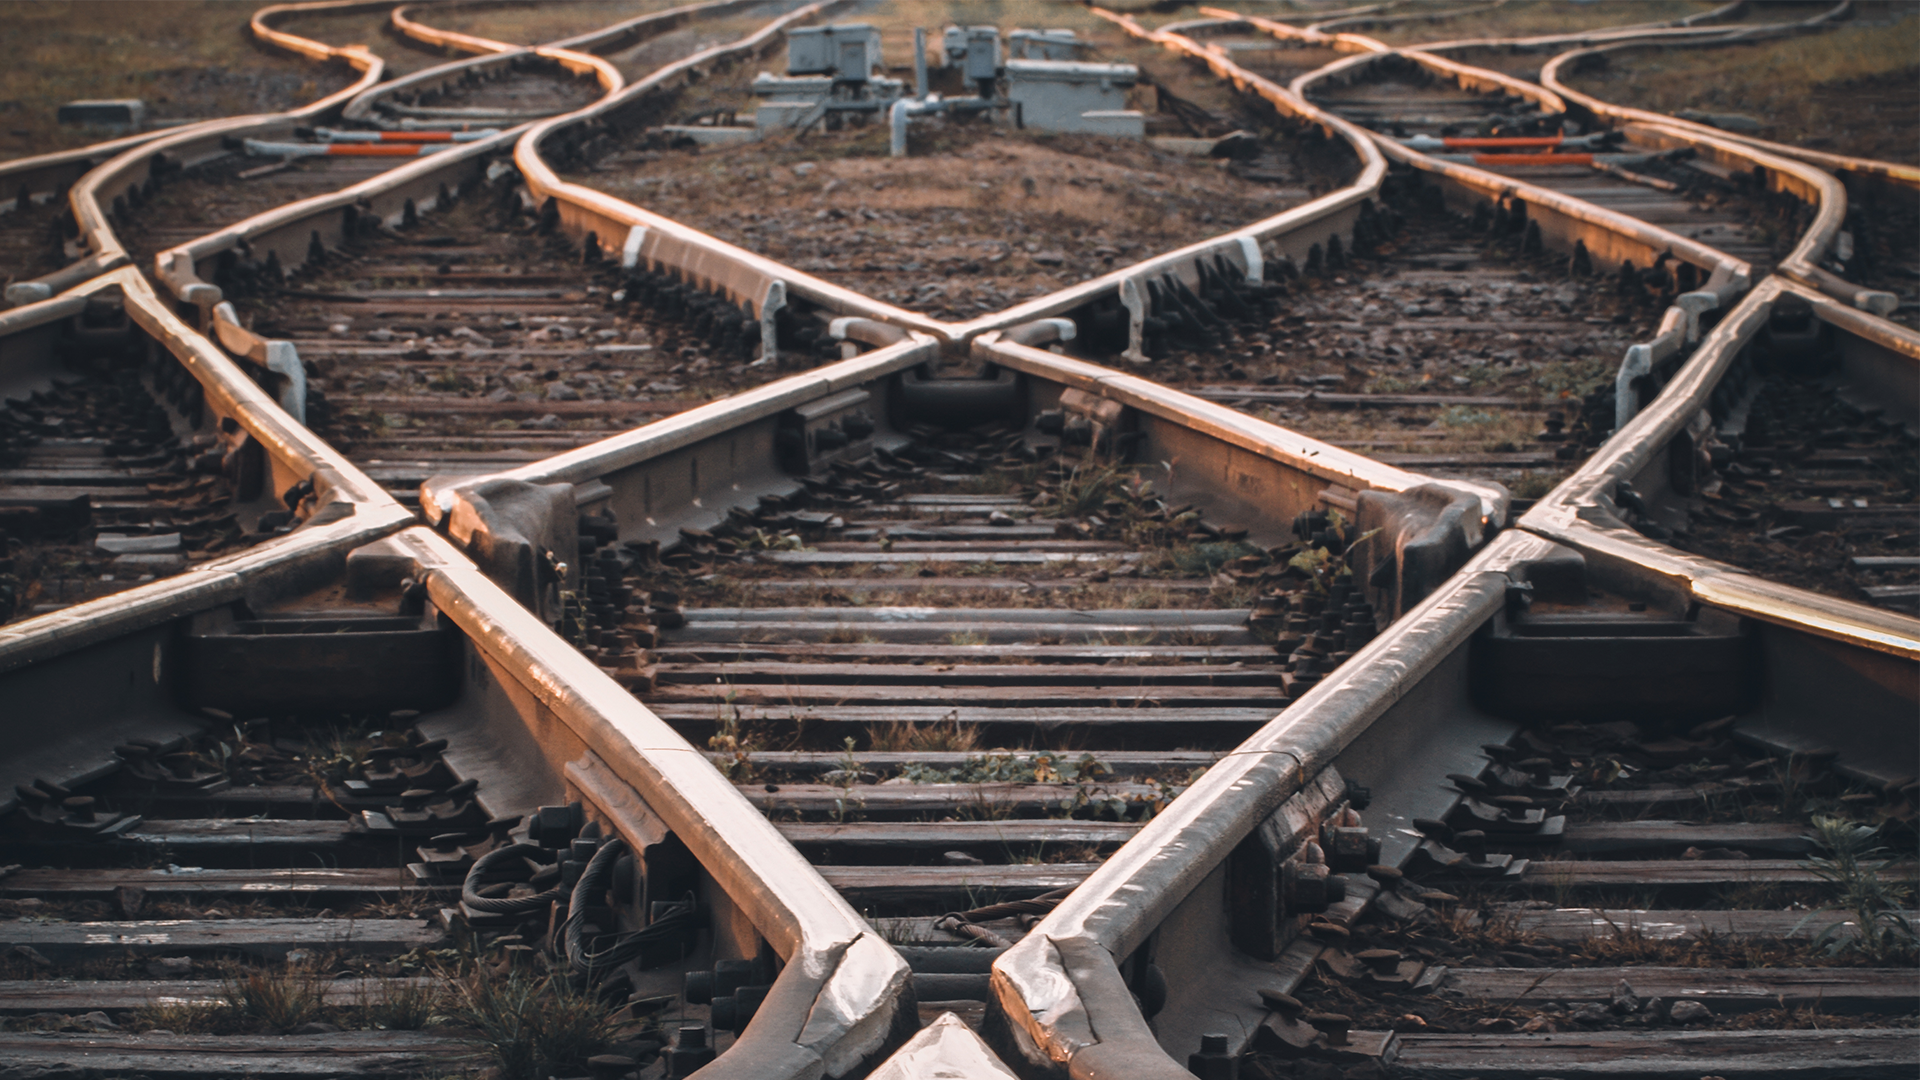 crossing-railway-tracks.-the-concept-of-the-beginning-of-the-way-planning-uncertainty-of-choices-and-decisions-1920x1080.png